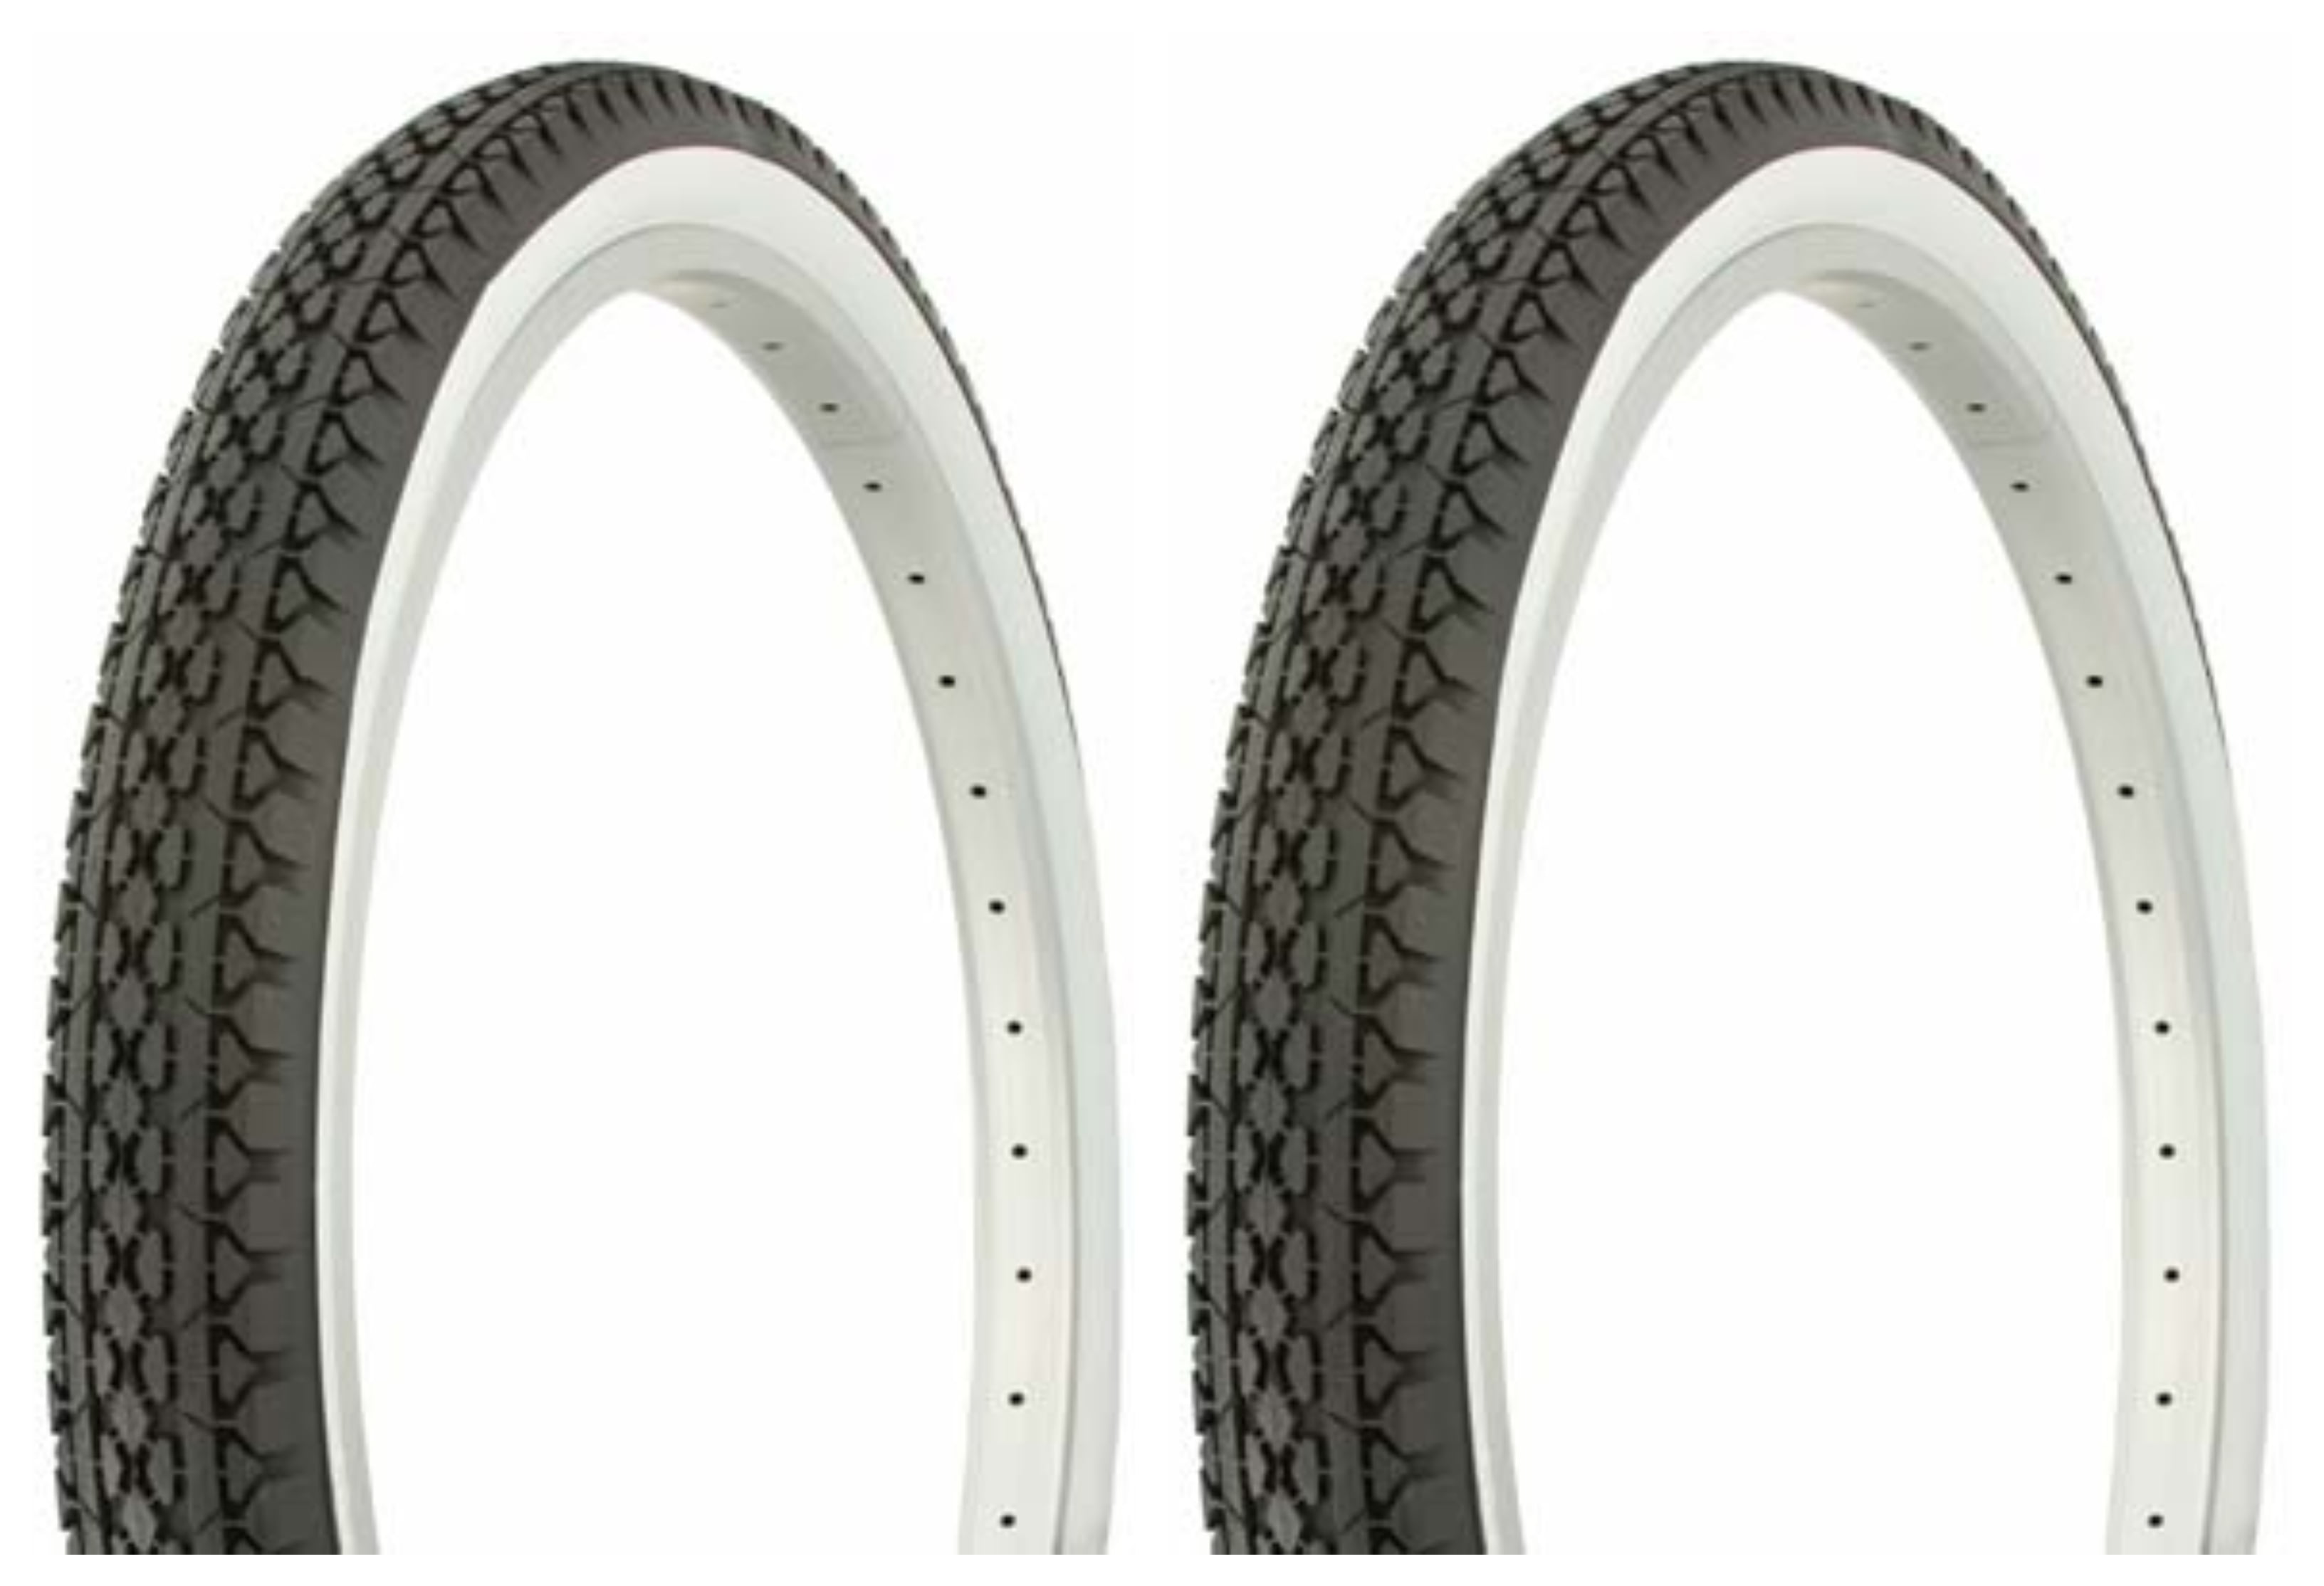 24'' X 1.75 WHITEWALL BICYCLE TIRES, TUBES & LINERS: TRICYCLE 3 3 3 CRUI 